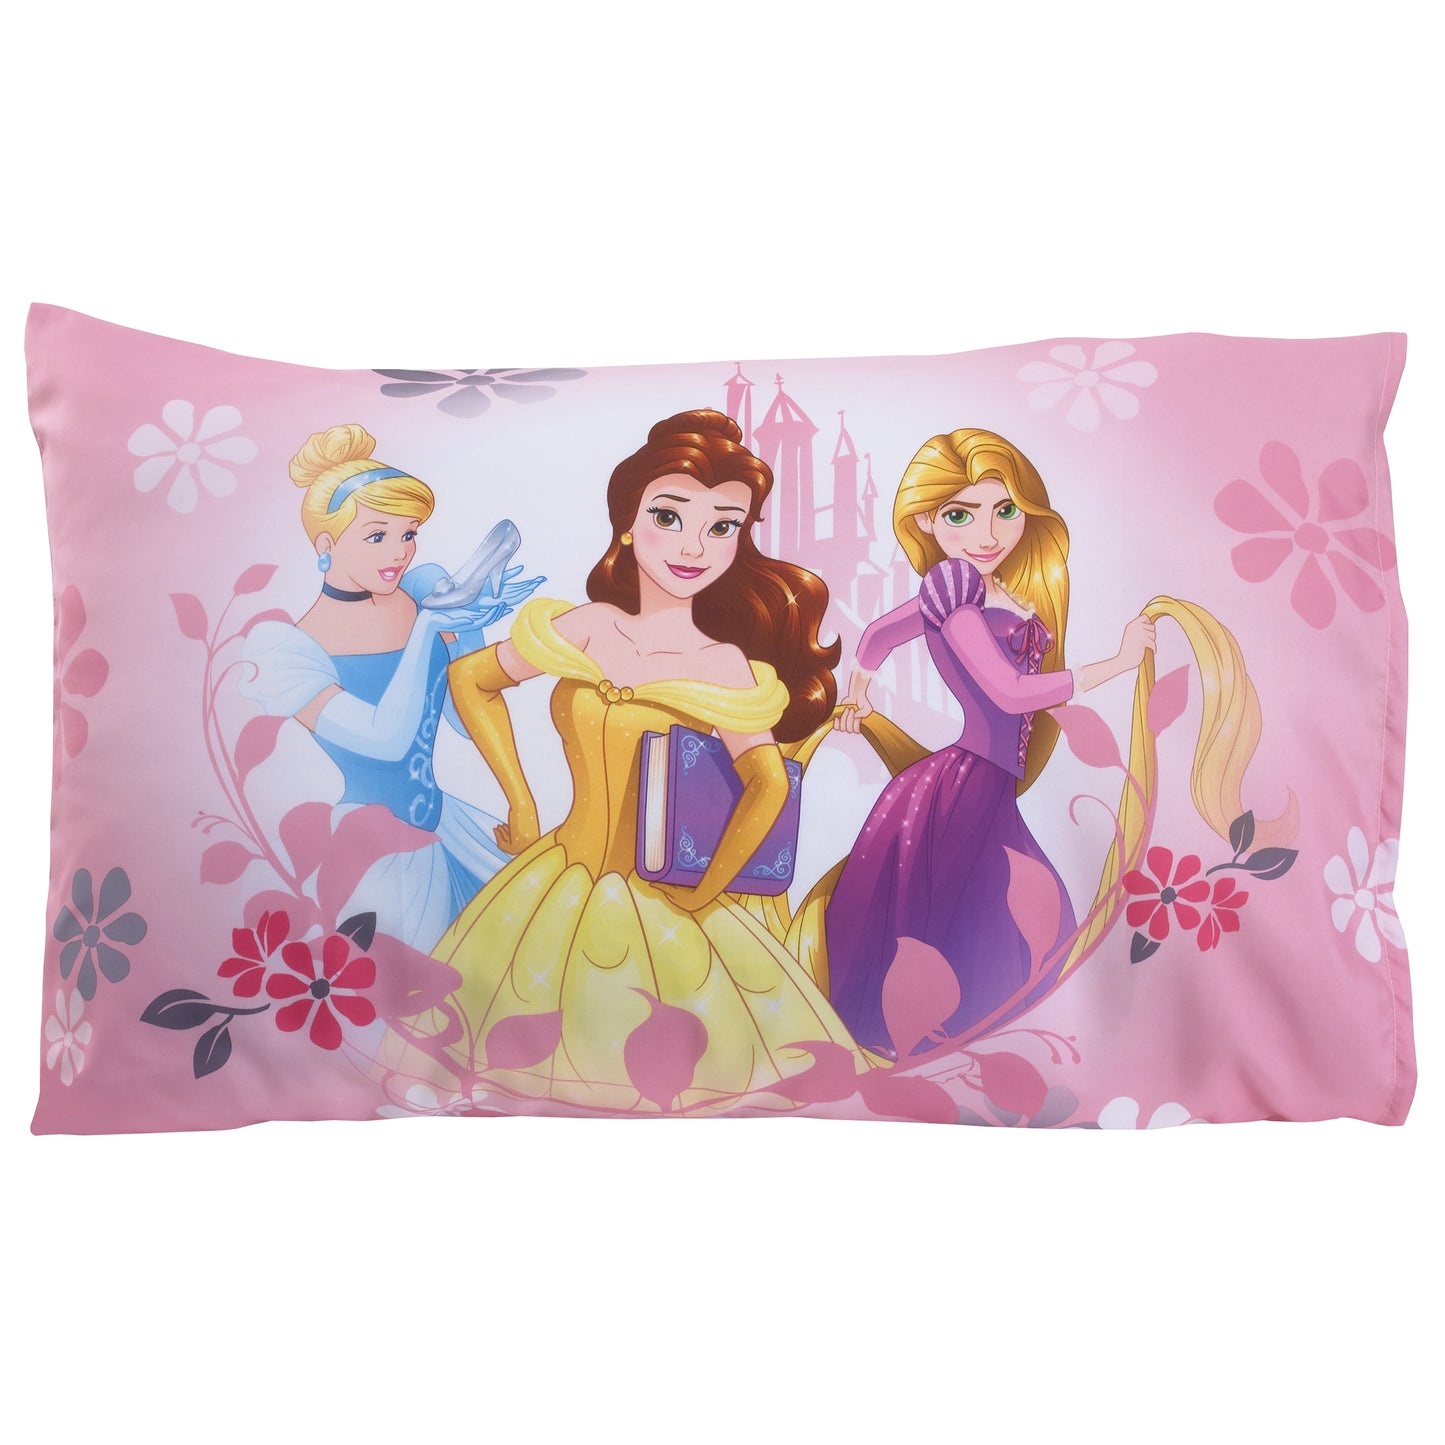 Disney Pretty Pretty Princess Pink, Blue, and Yellow 4 Piece Toddler Bed Set - Comforter, Fitted Bottom Sheet, Flat Top Sheet, and Reversible Pillowcase